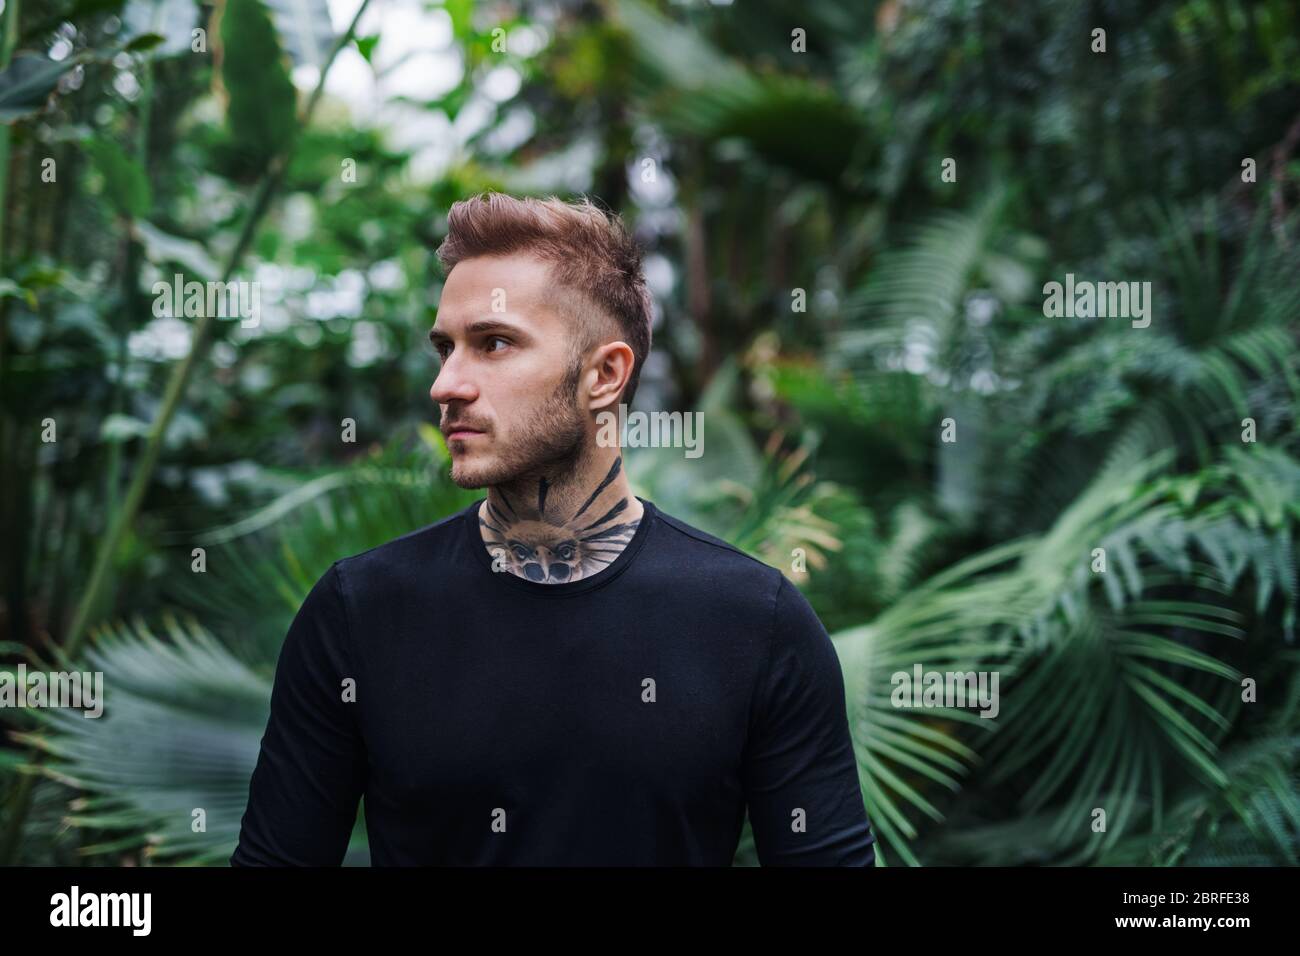 Young man standing in botanical garden. Copy space. Stock Photo